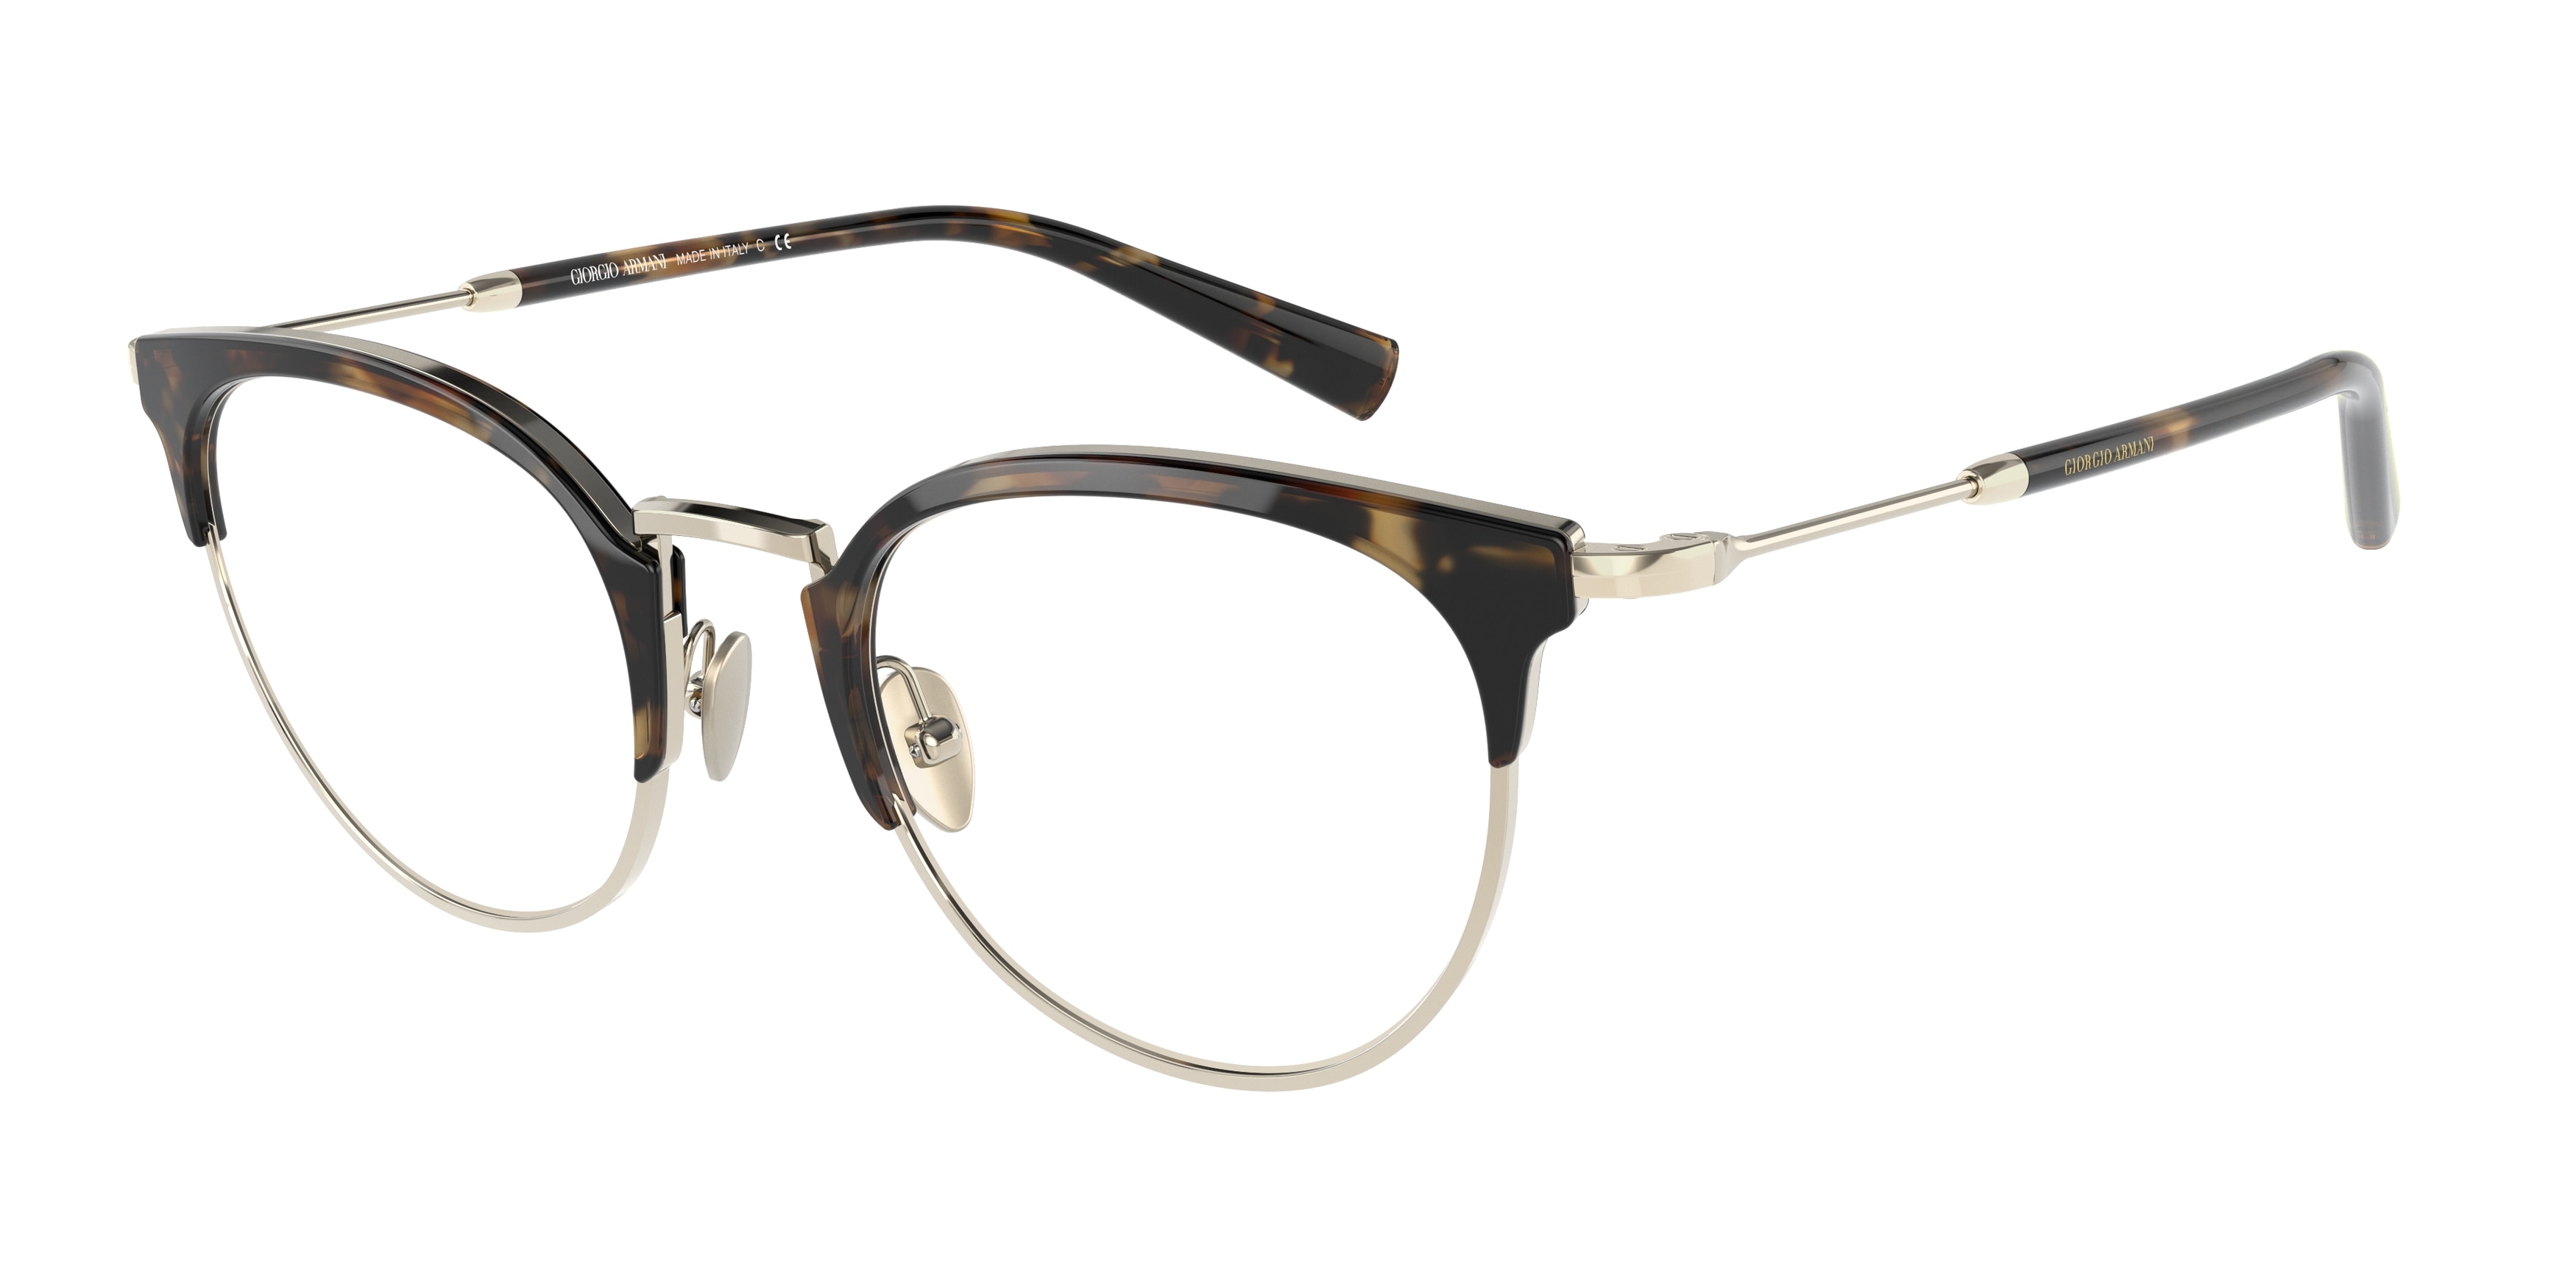 3215 - Pale Gold/Brown Tortoise